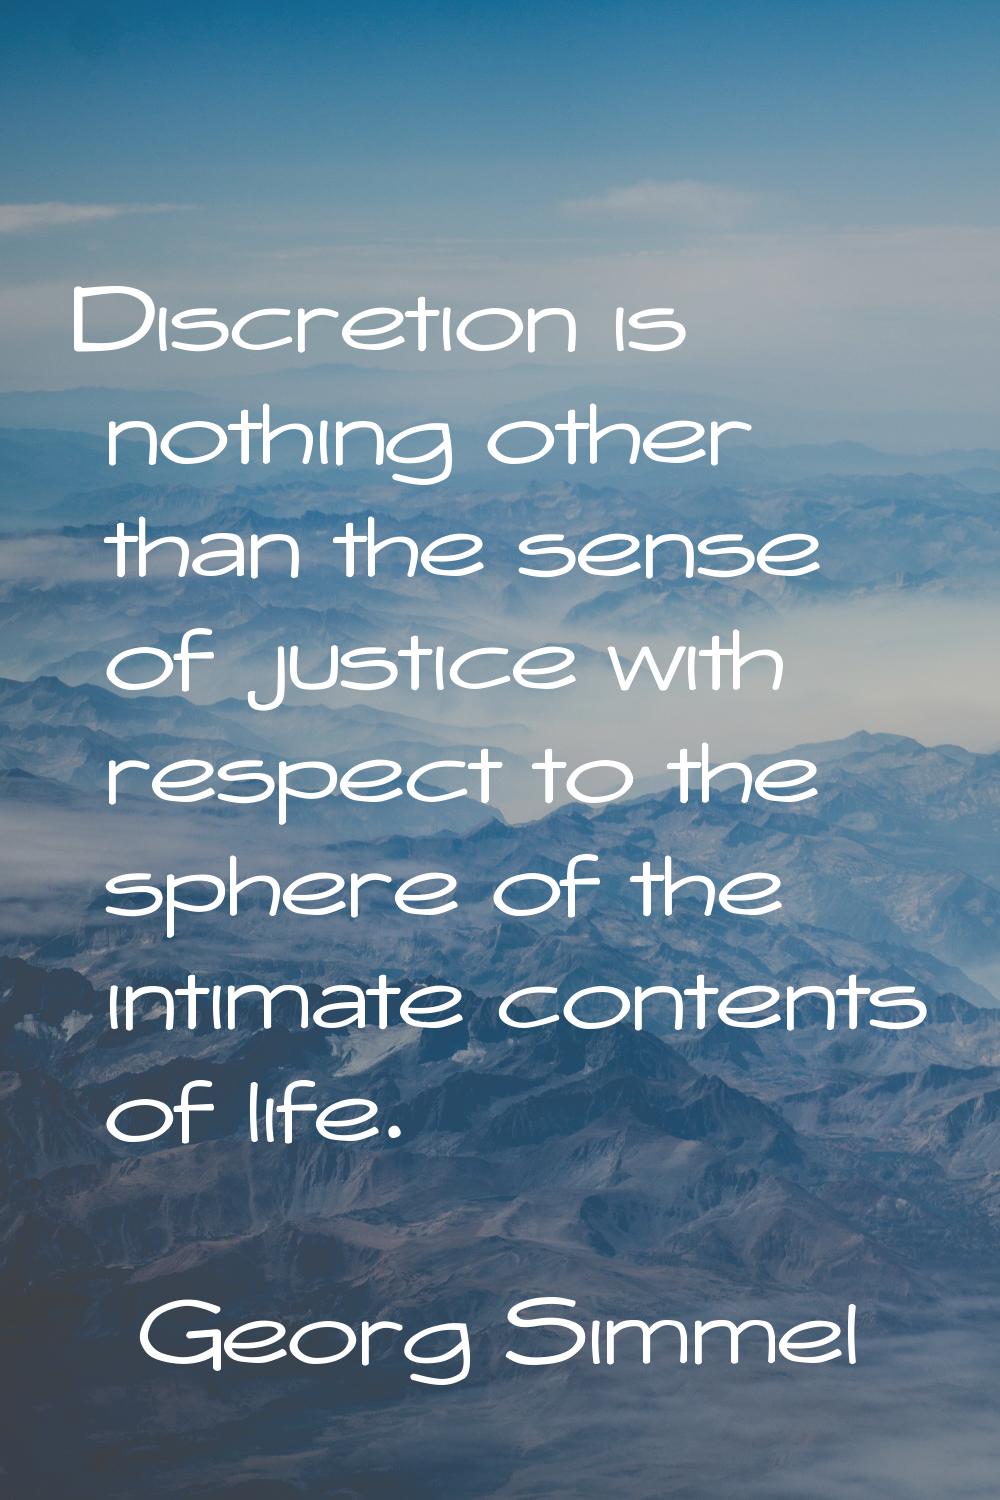 Discretion is nothing other than the sense of justice with respect to the sphere of the intimate co